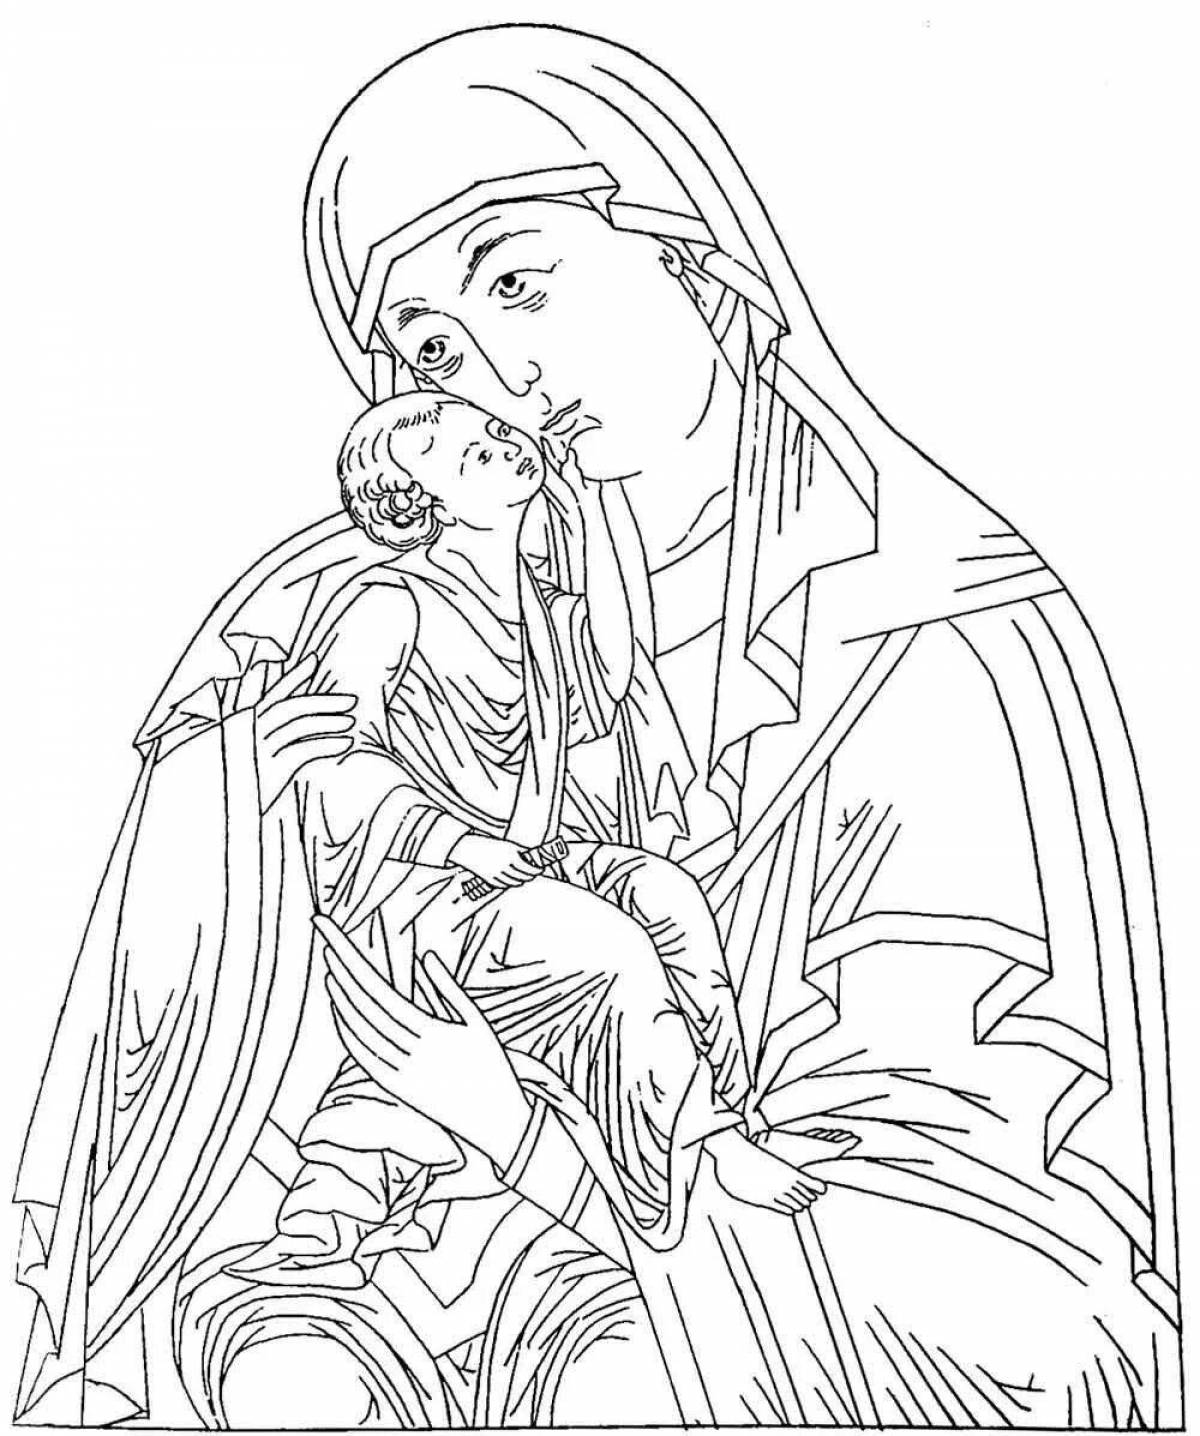 Virgin Mary and Child #1